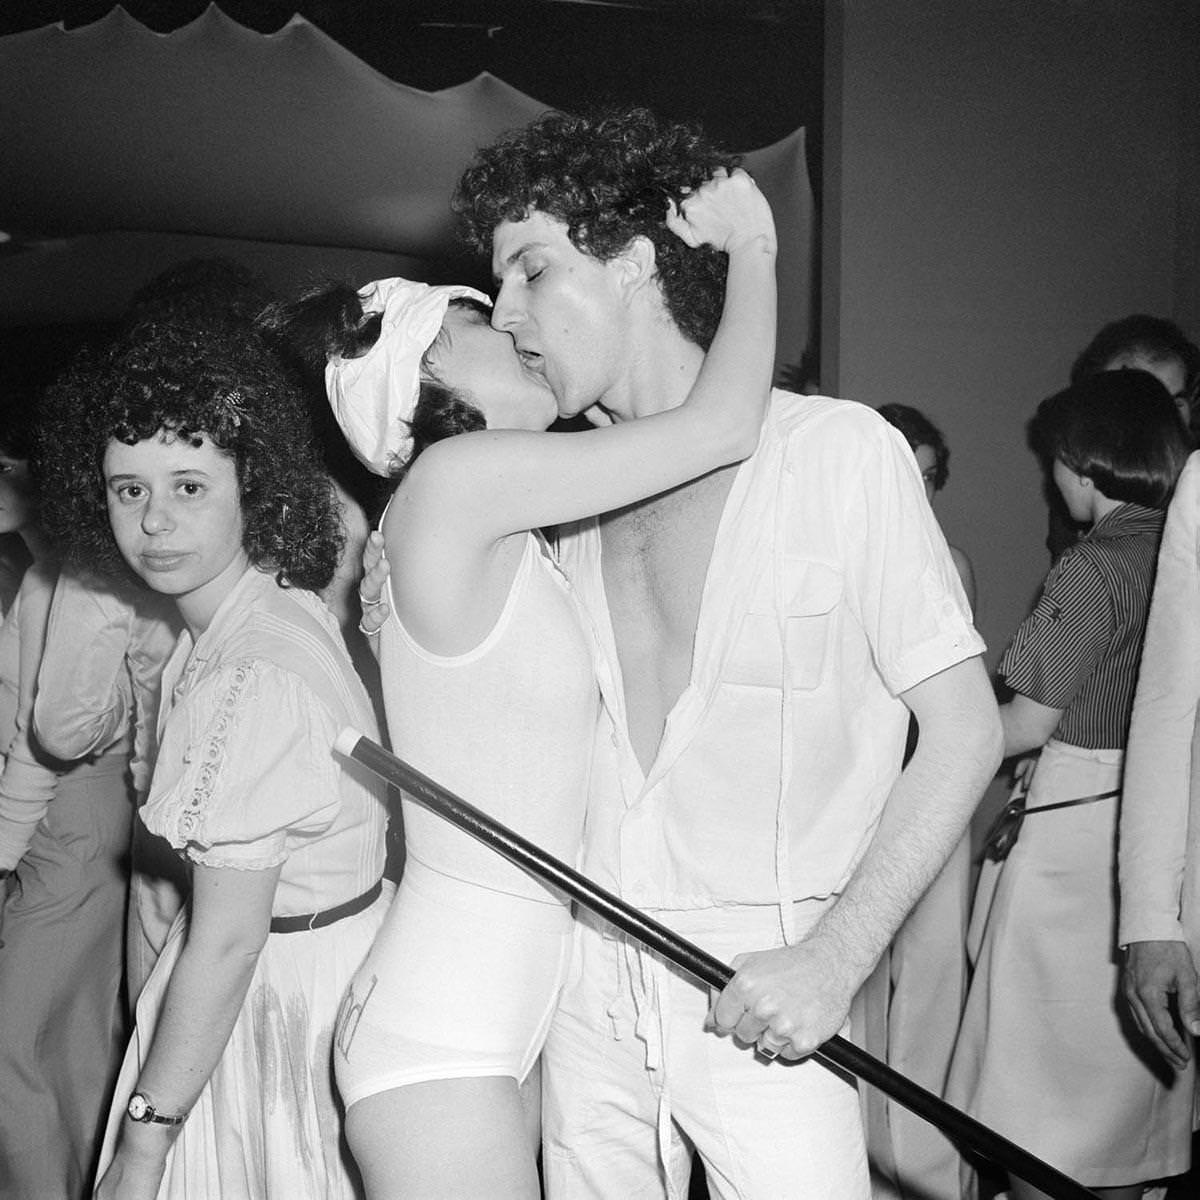 “Arleen Gottfried Sees Me As Judi Jupiter Makes Out At White Party” – Les Mouches, April 1978